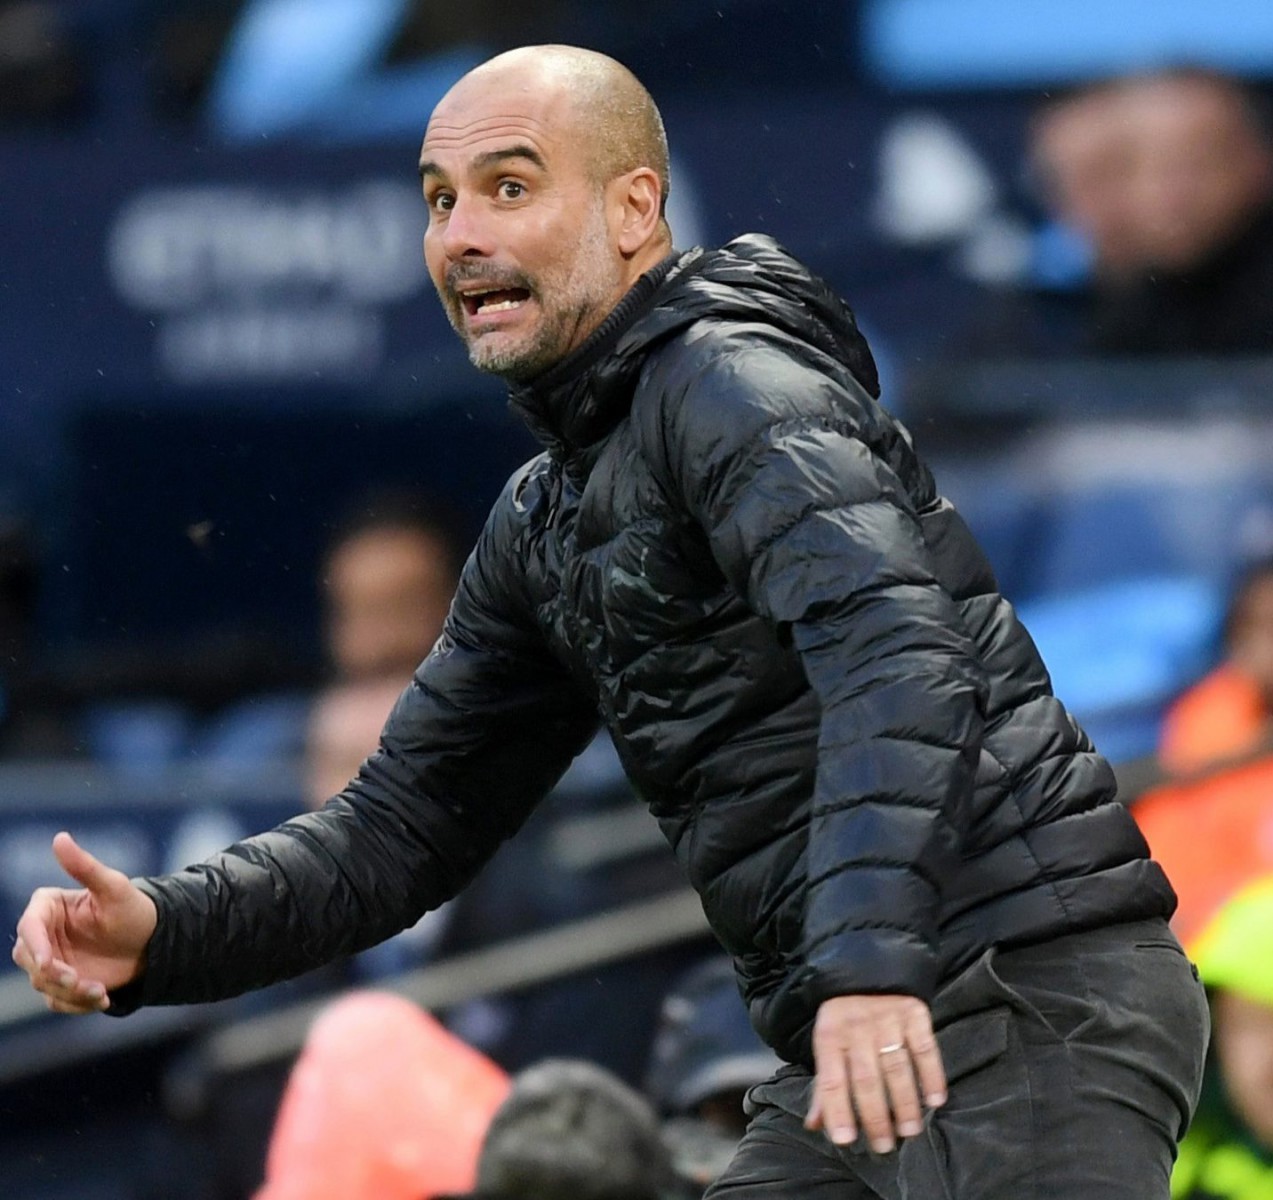 Man city boss Pep Guardiola cannot afford a slip-up at Anfield next Sunday or Liverpool will be overwhelming title favourites